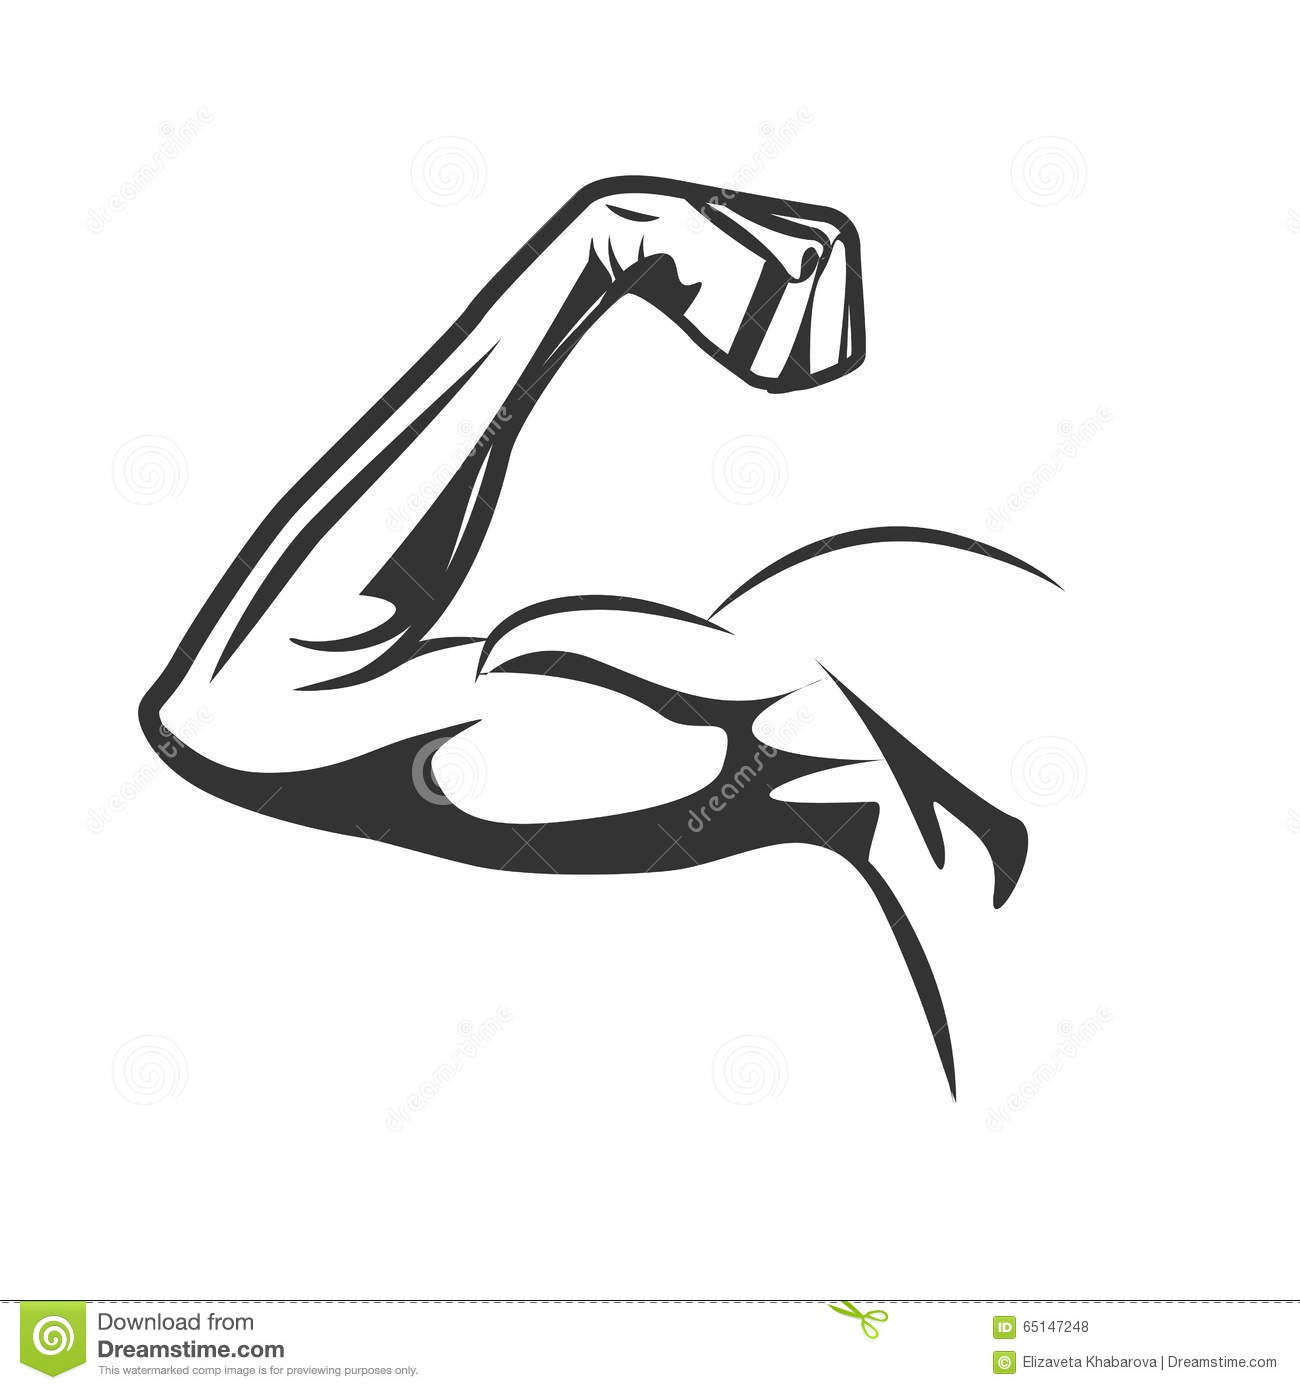 bicep clipart black and white